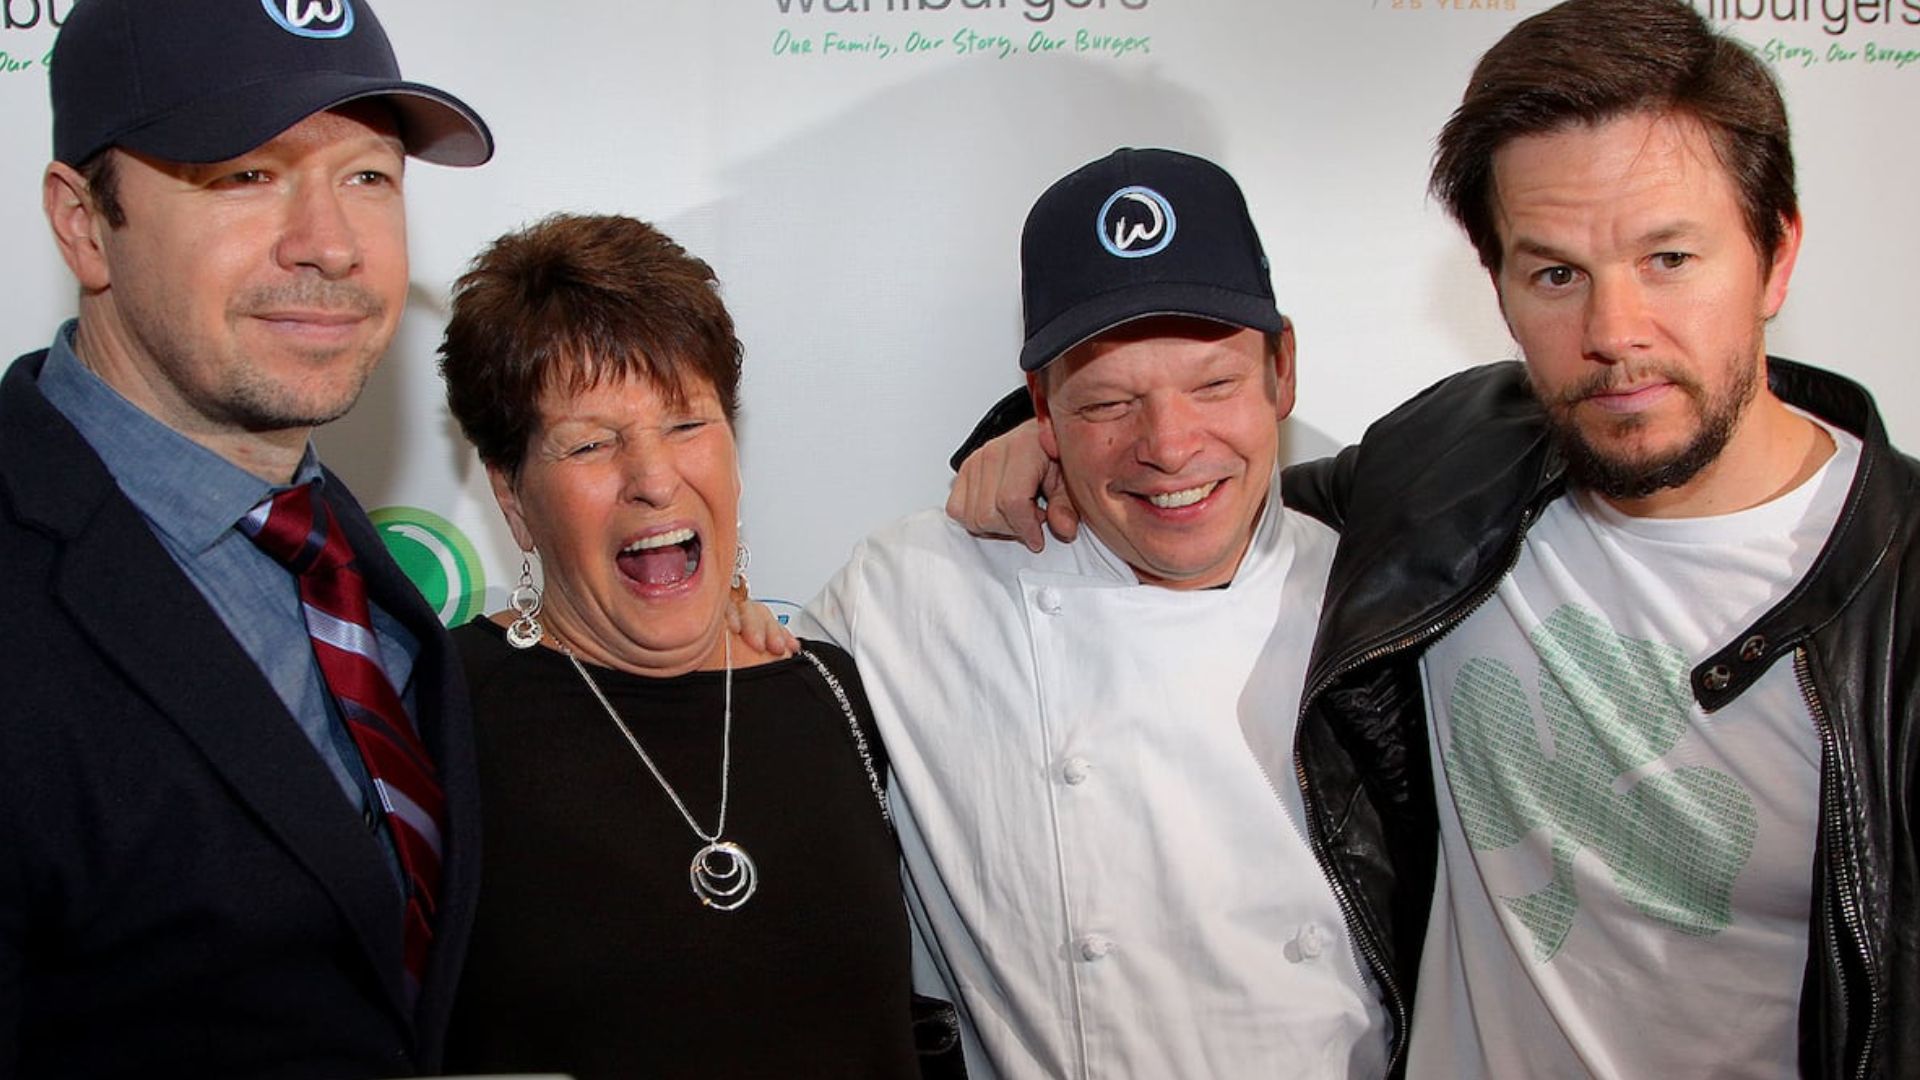 Wahlberg family